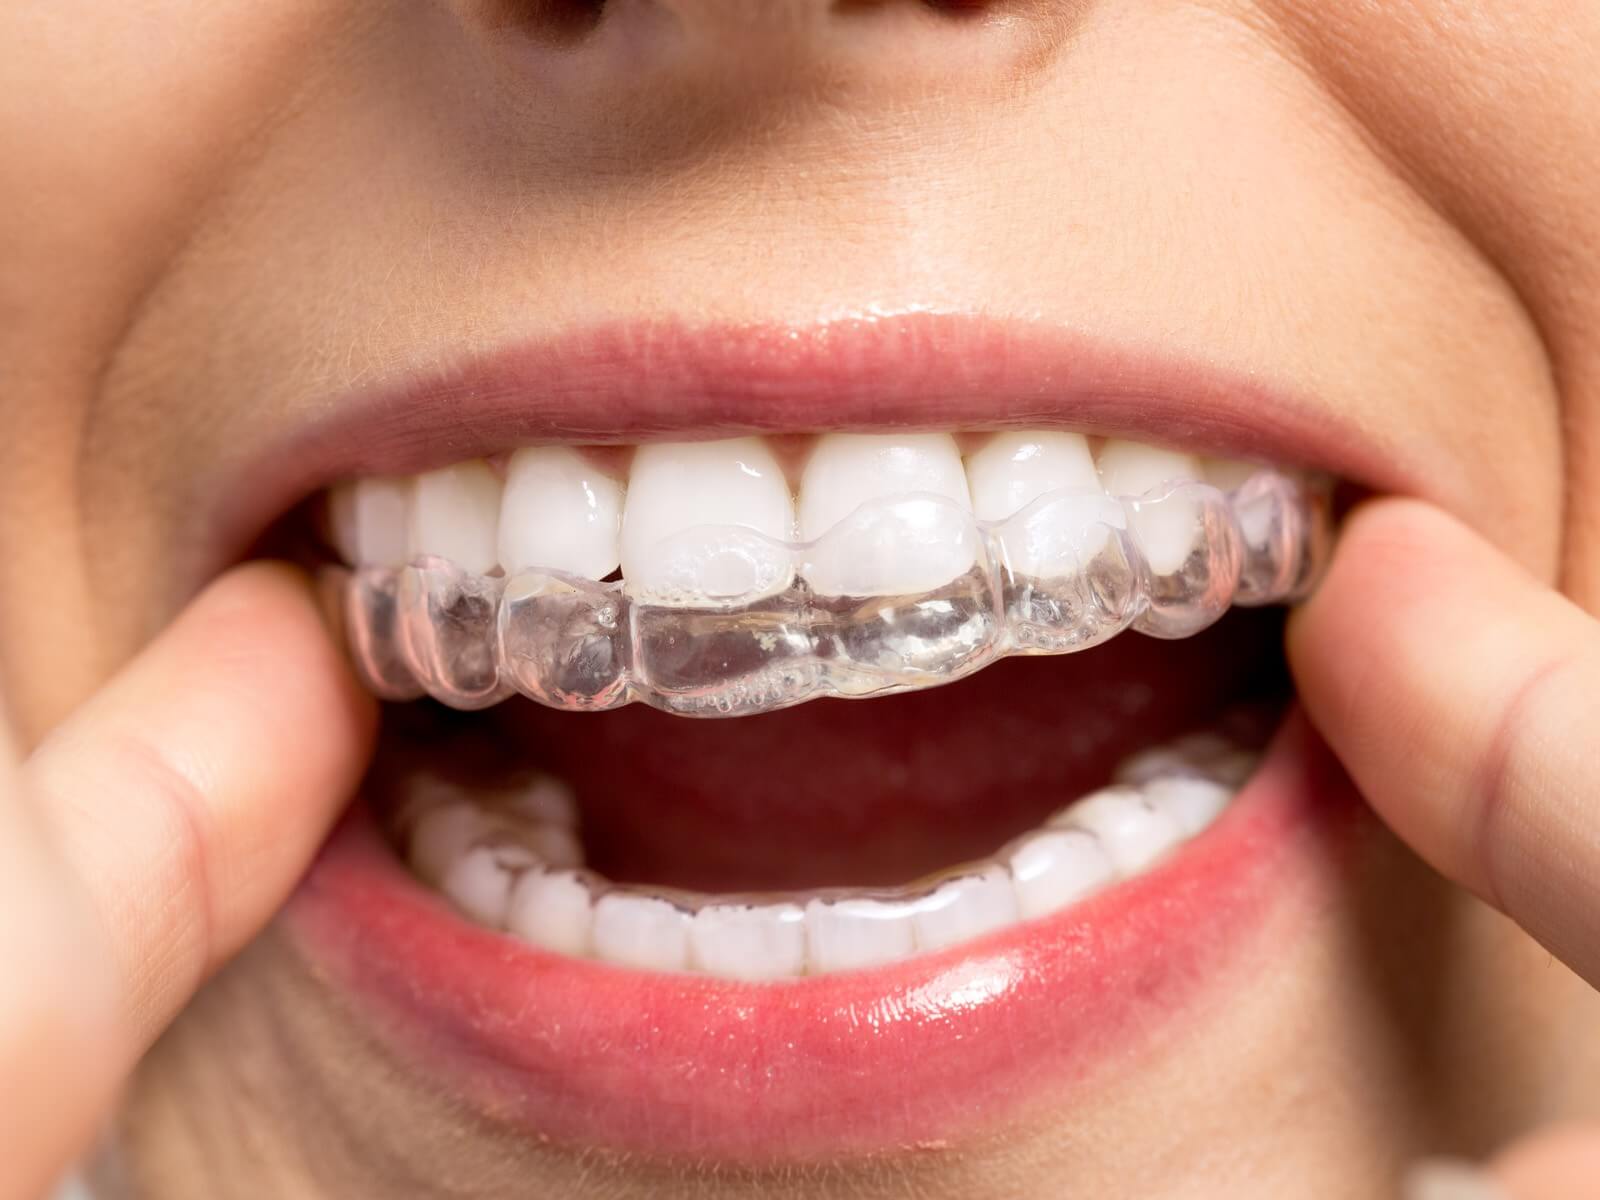 How painful is Invisalign?